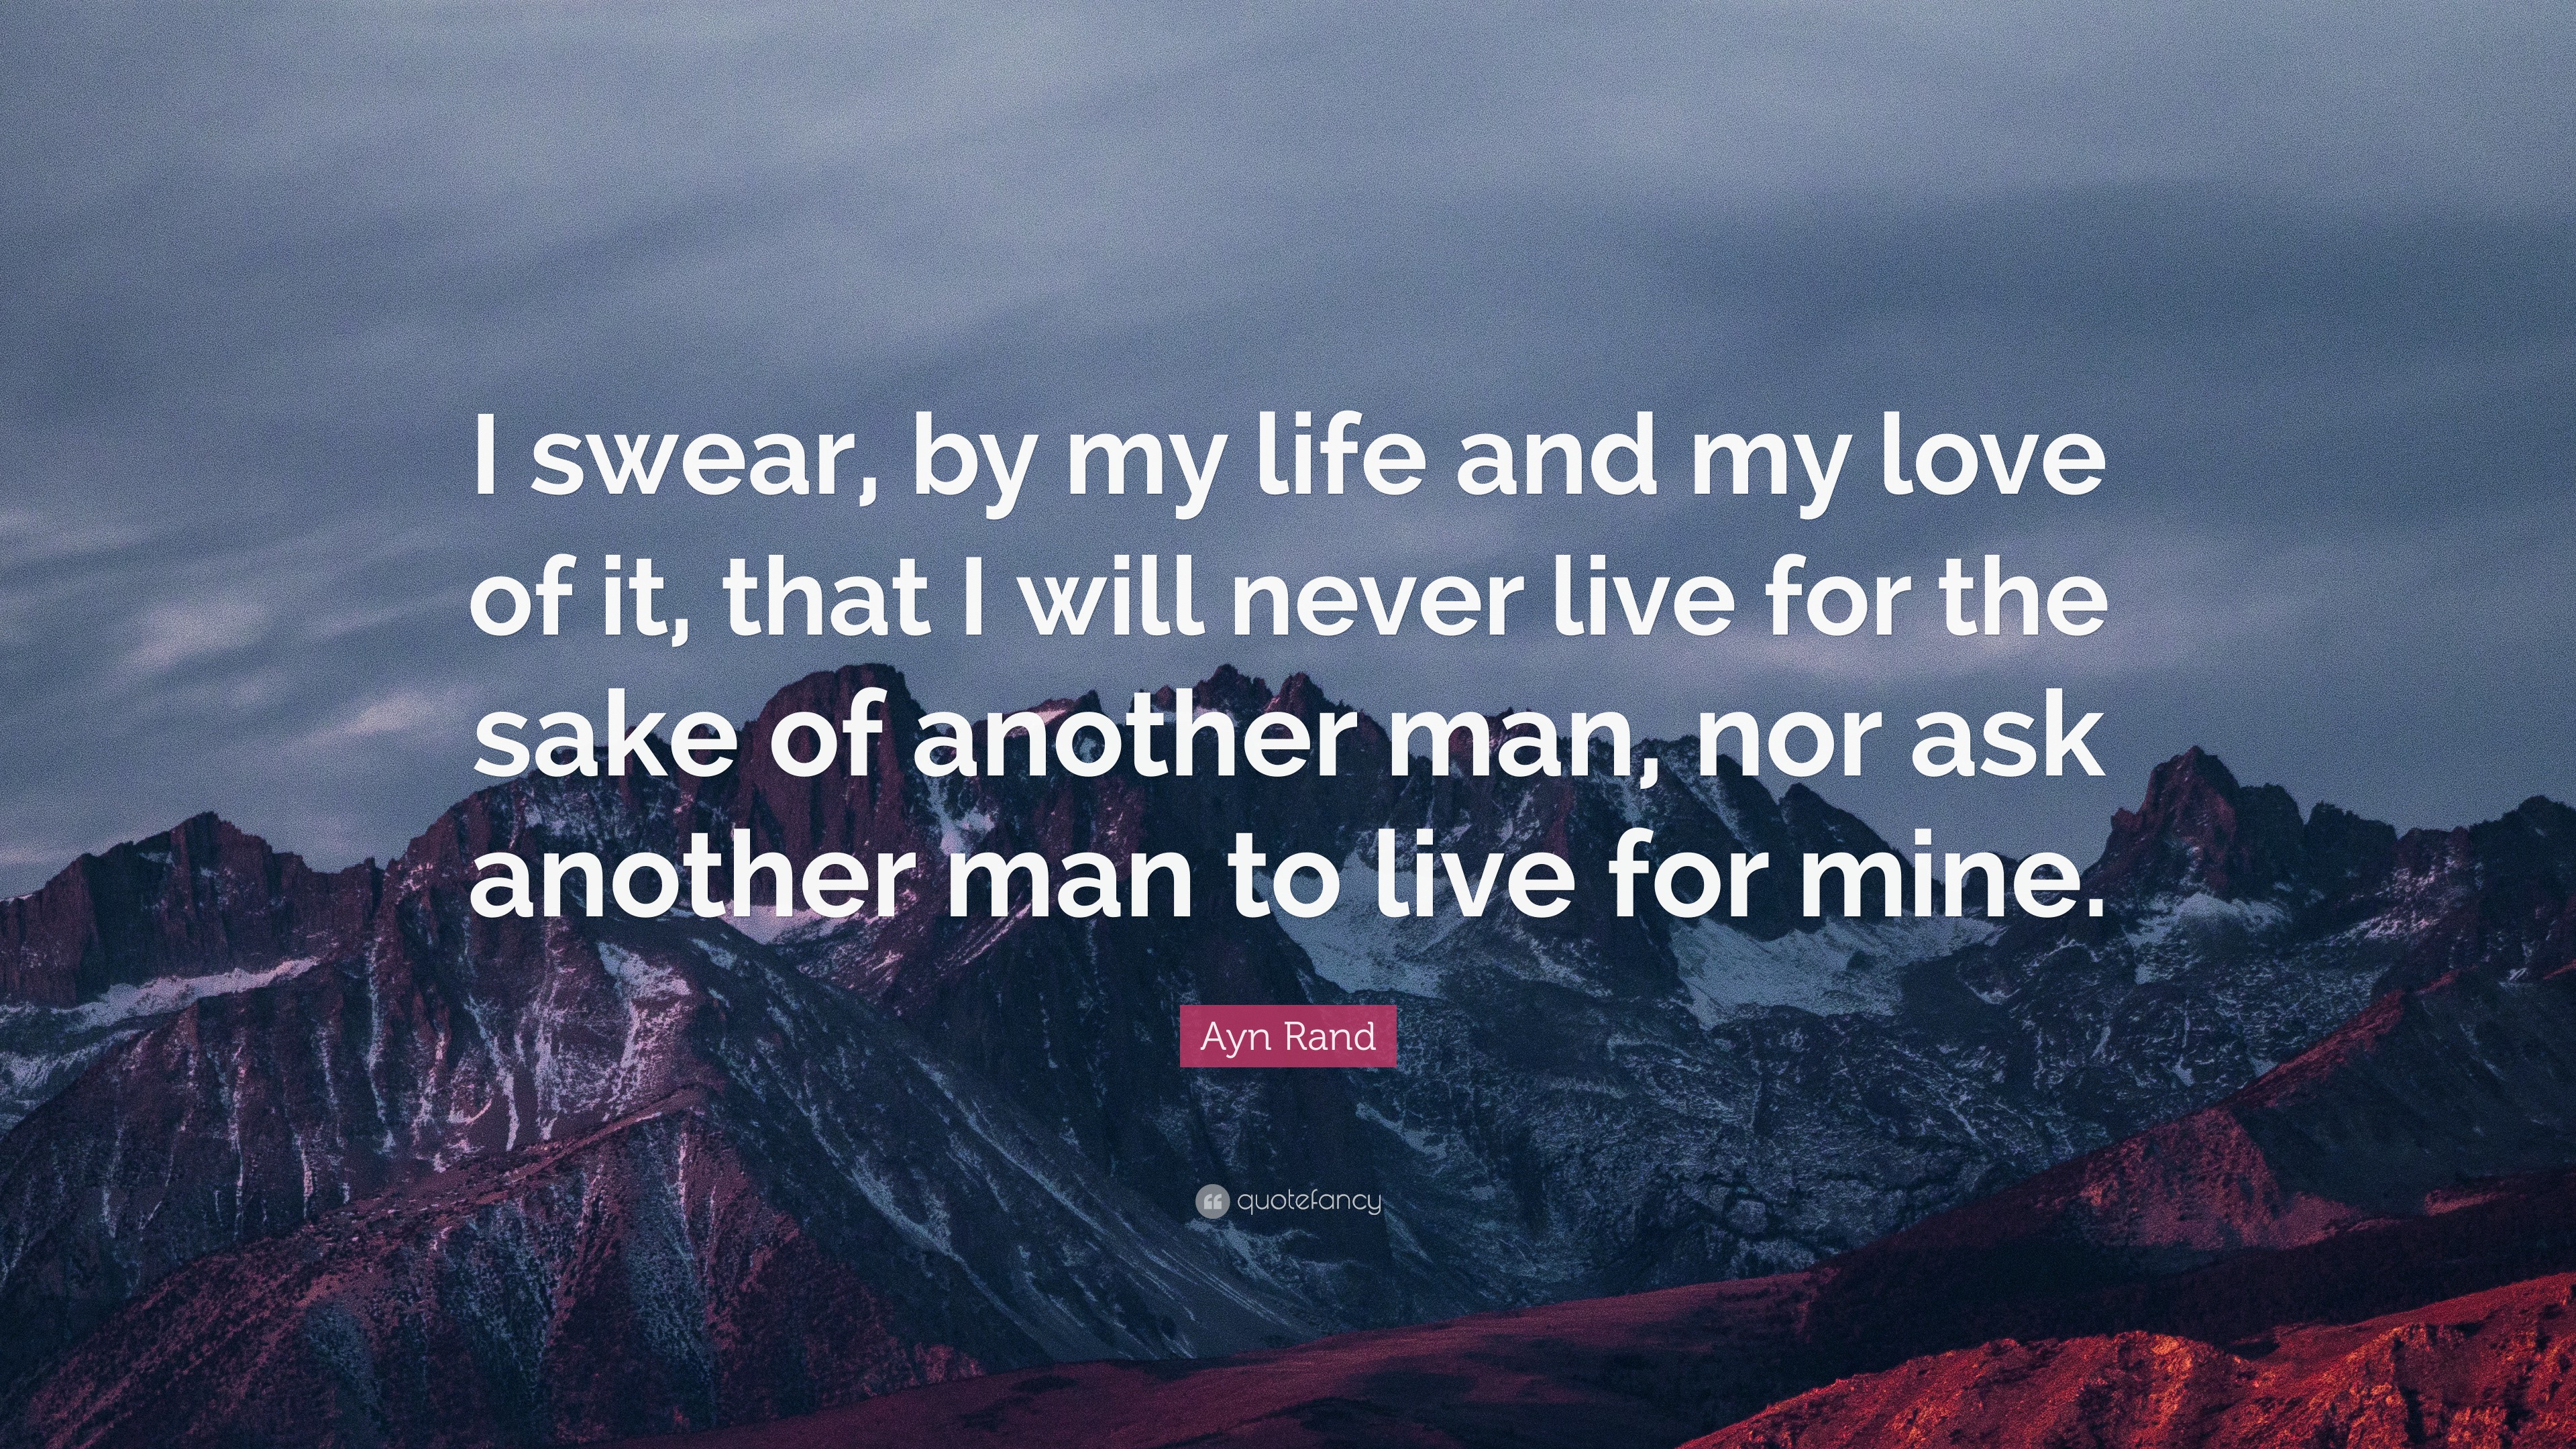 Ayn Rand Quote “I swear by my life and my love of it